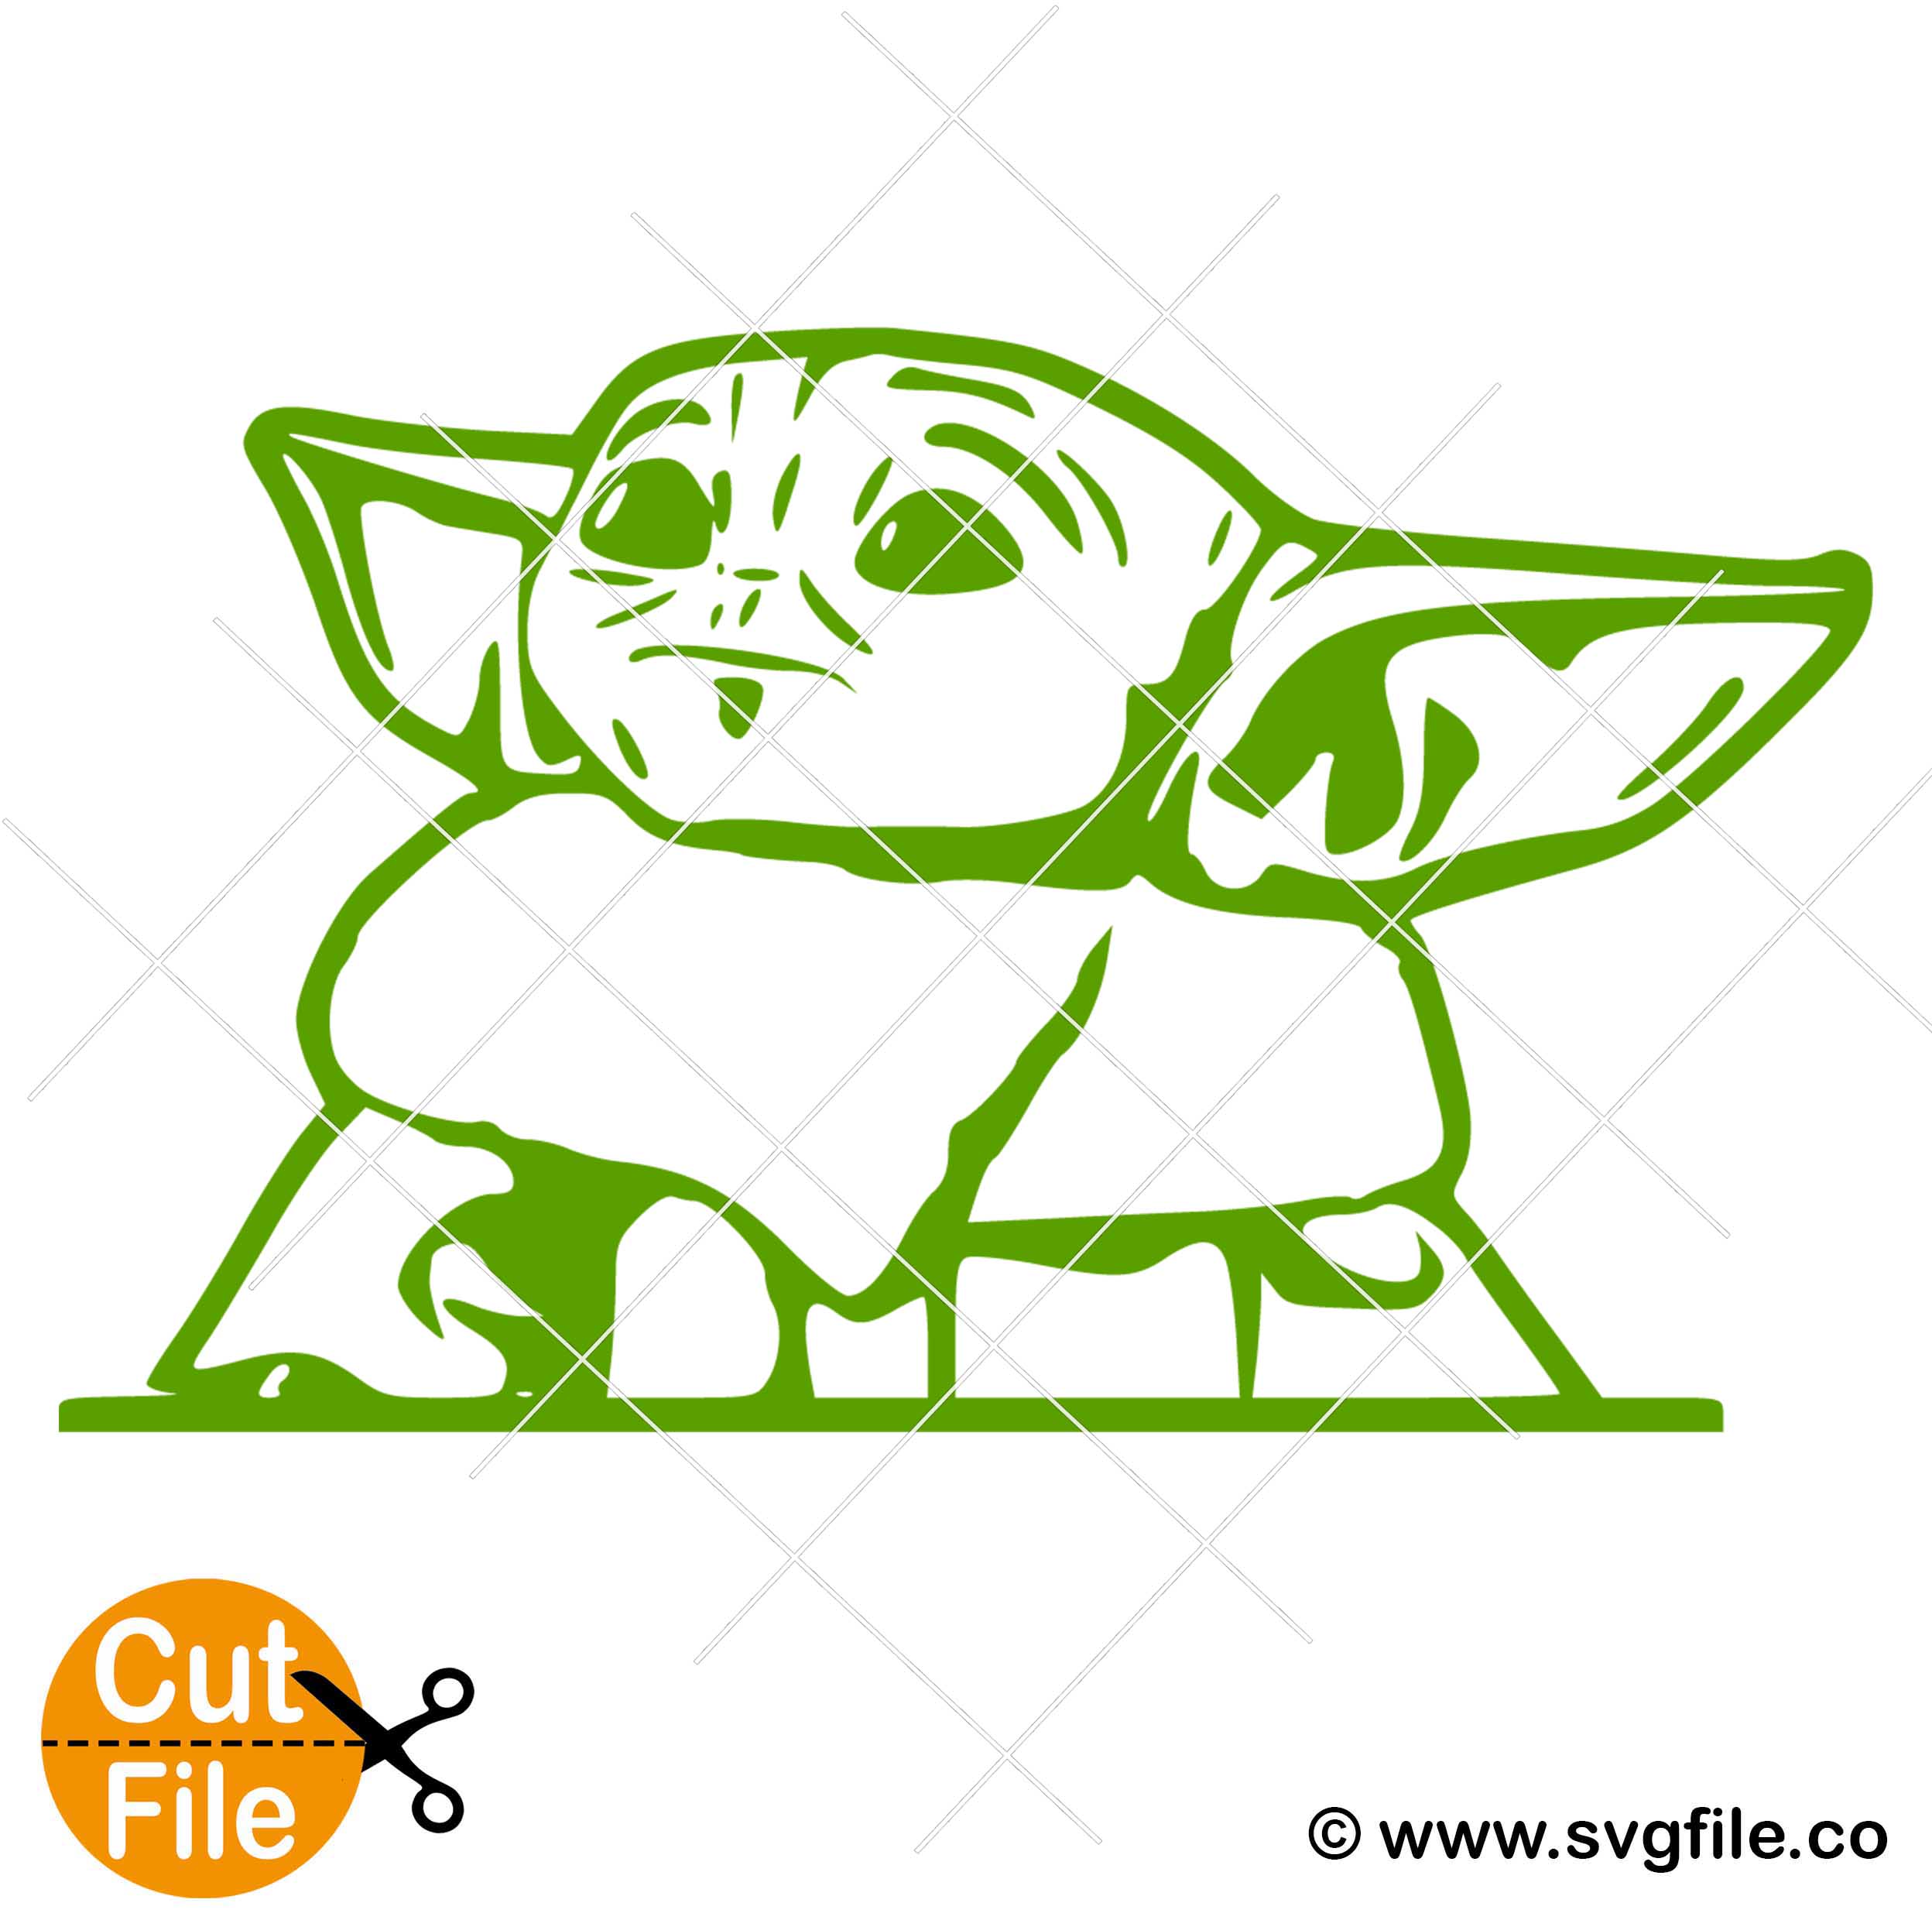 Download Baby Yoda Peek a Boo SVG - Svgfile.co - 0.99 Cent SVG ...